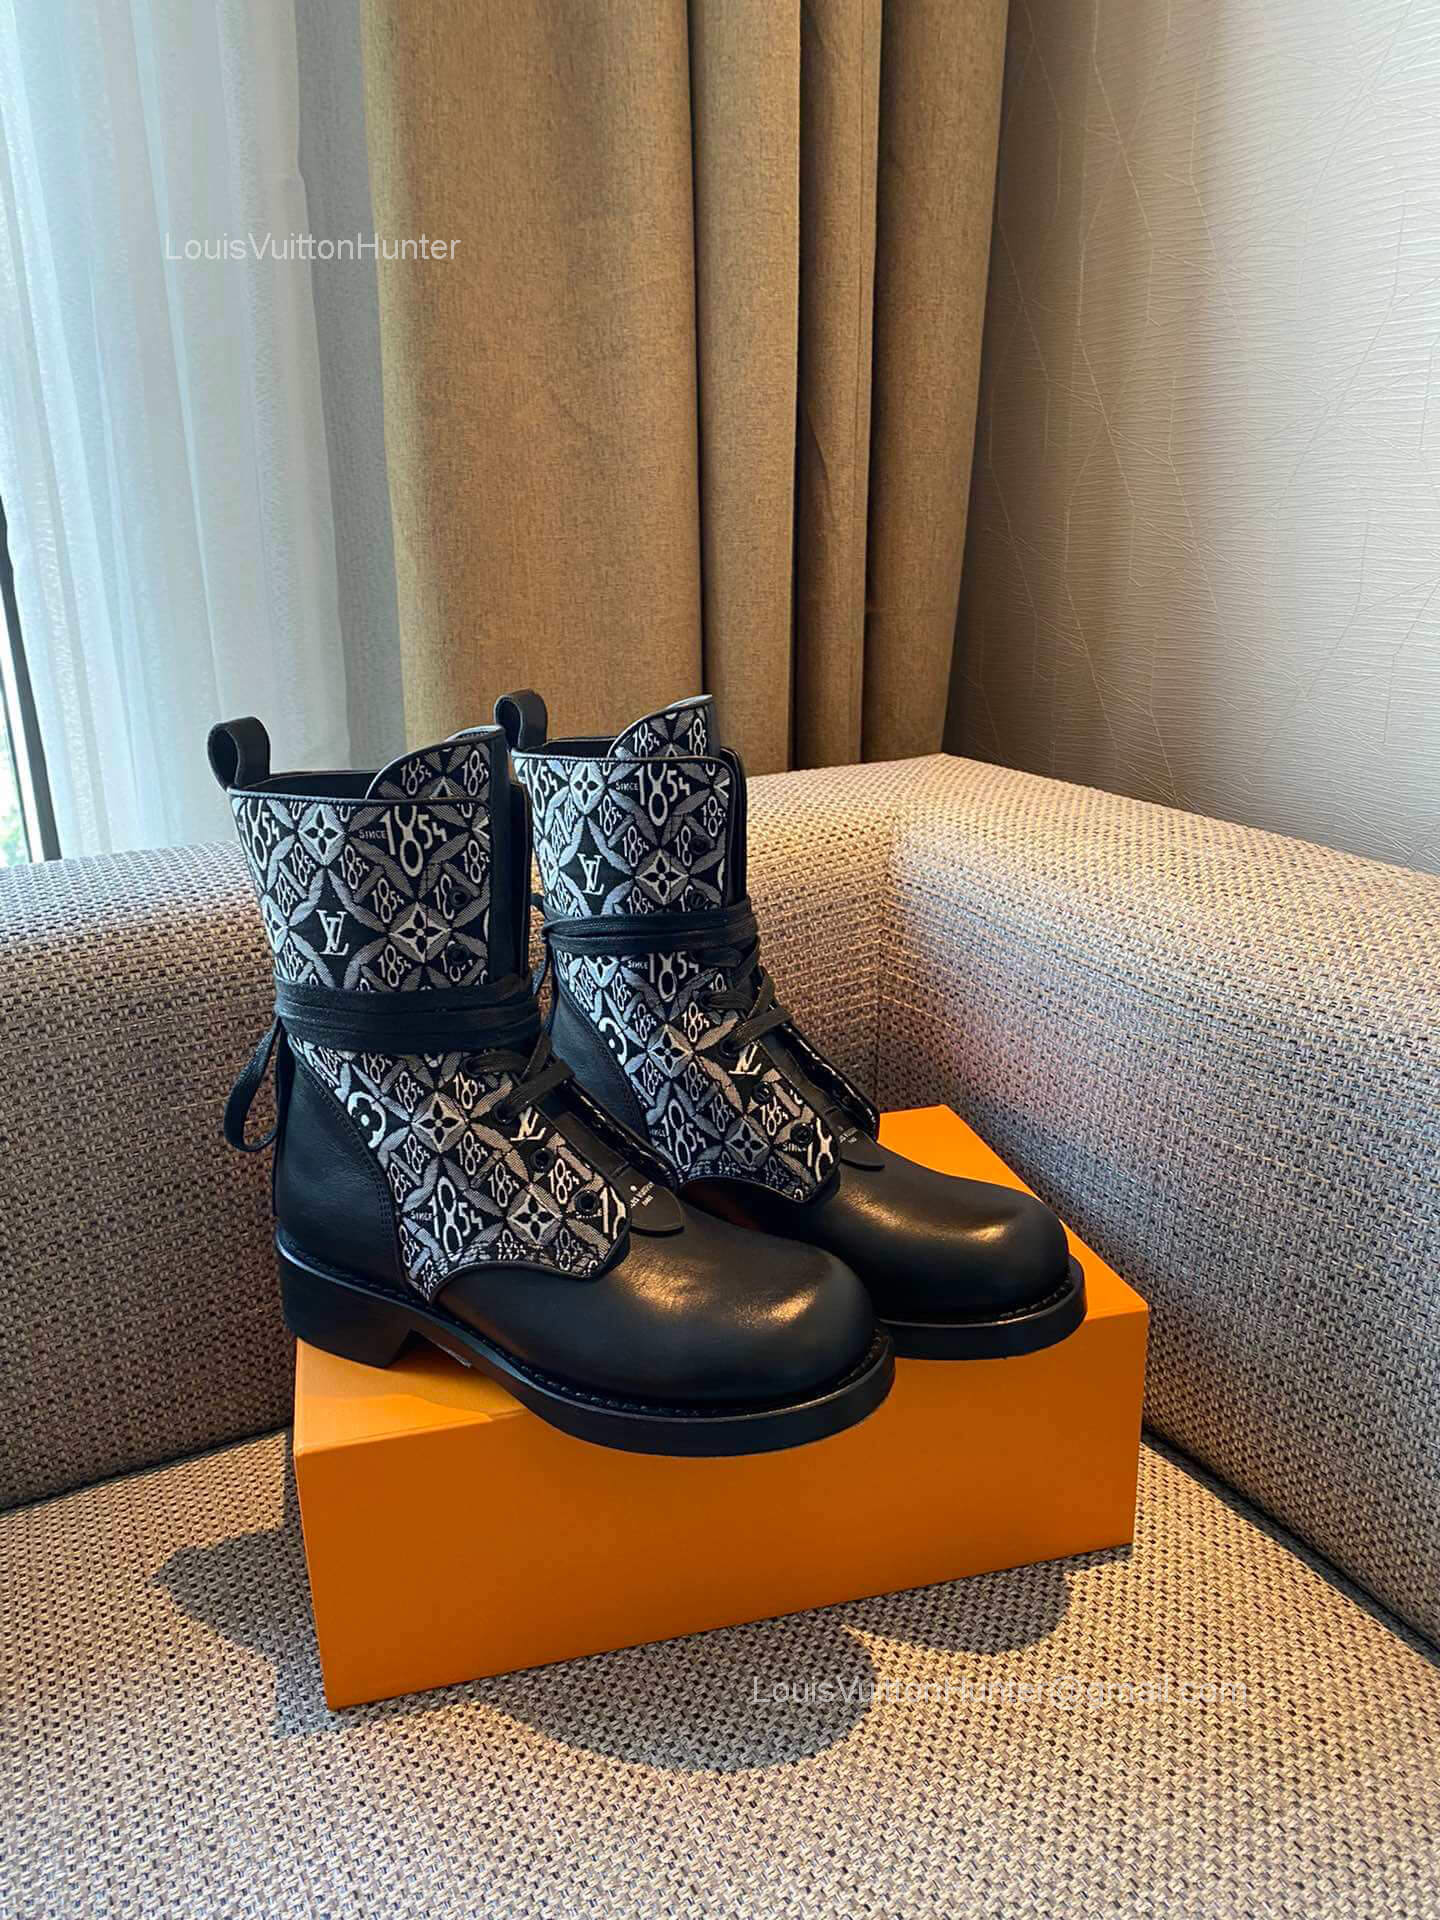 Louis Vuitton Since 1854 Metropolis Flat Ranger Ankle Boot in Gray Jacquard Textile and Black Calf Leather 2281700